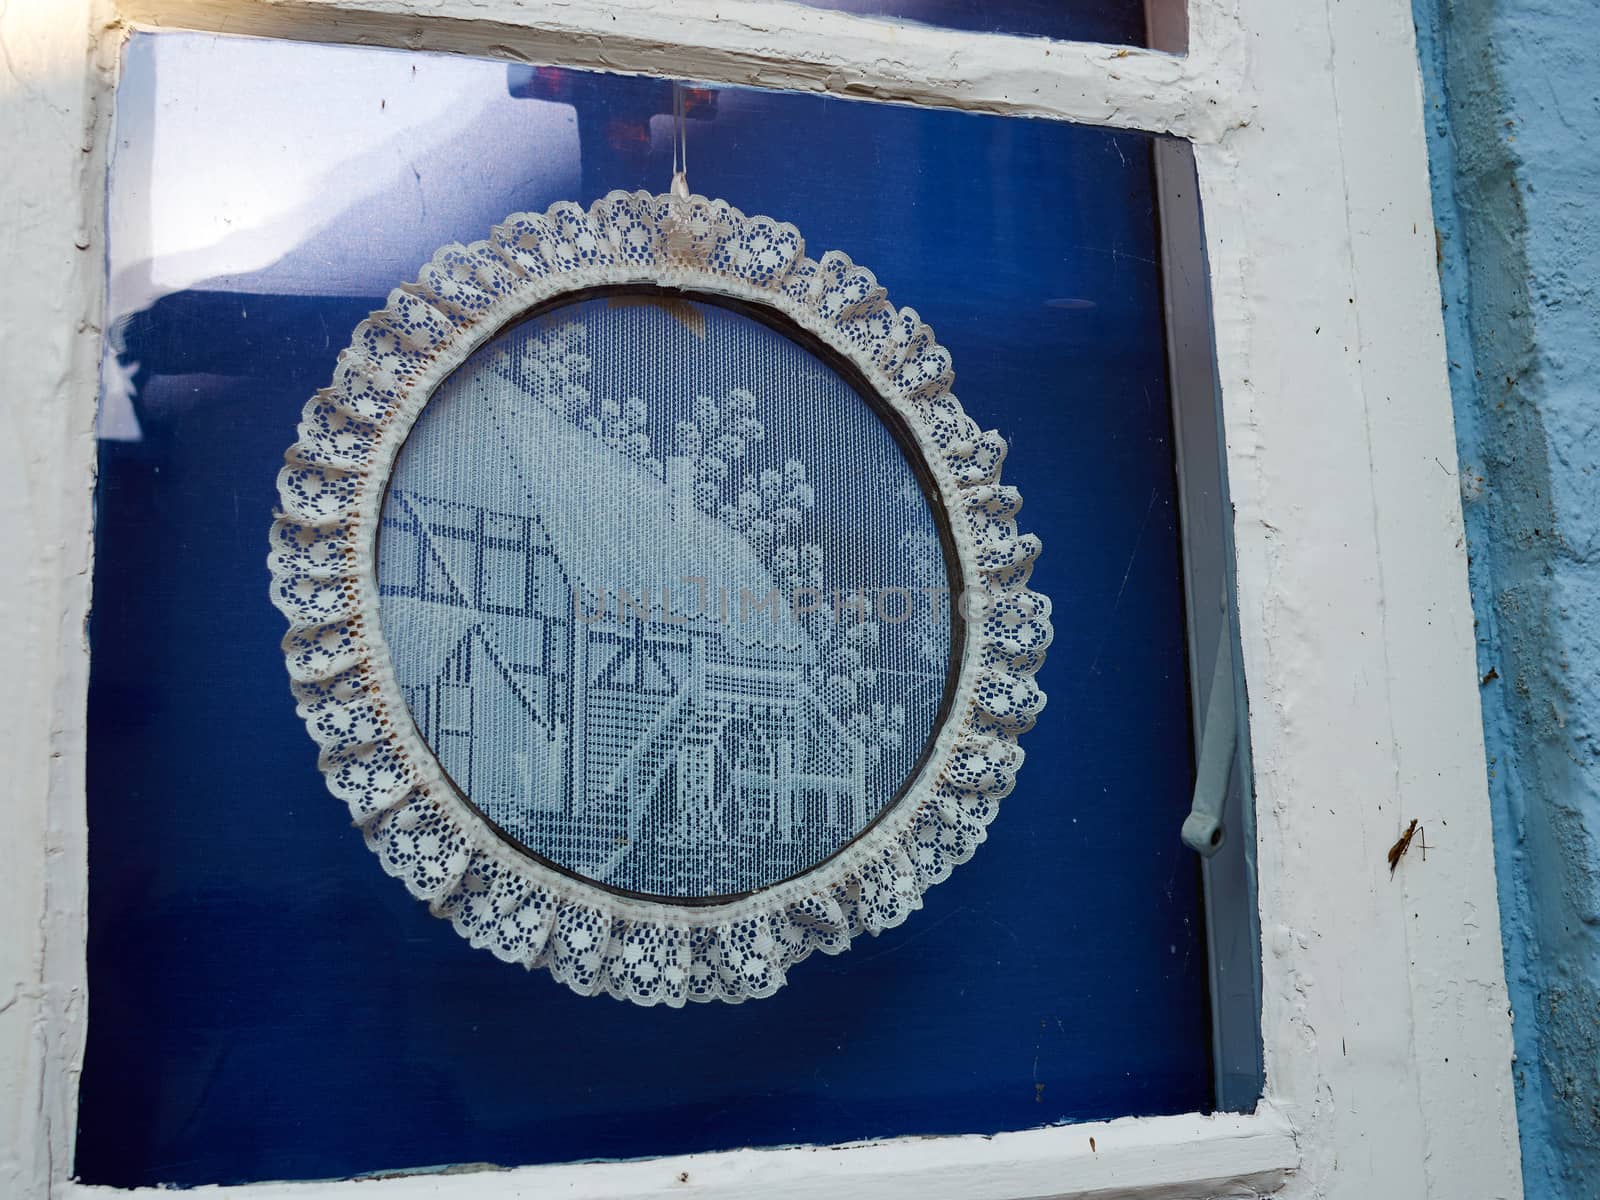 Traditional European handmade crochet lace decoration shaped as a circle in a window    